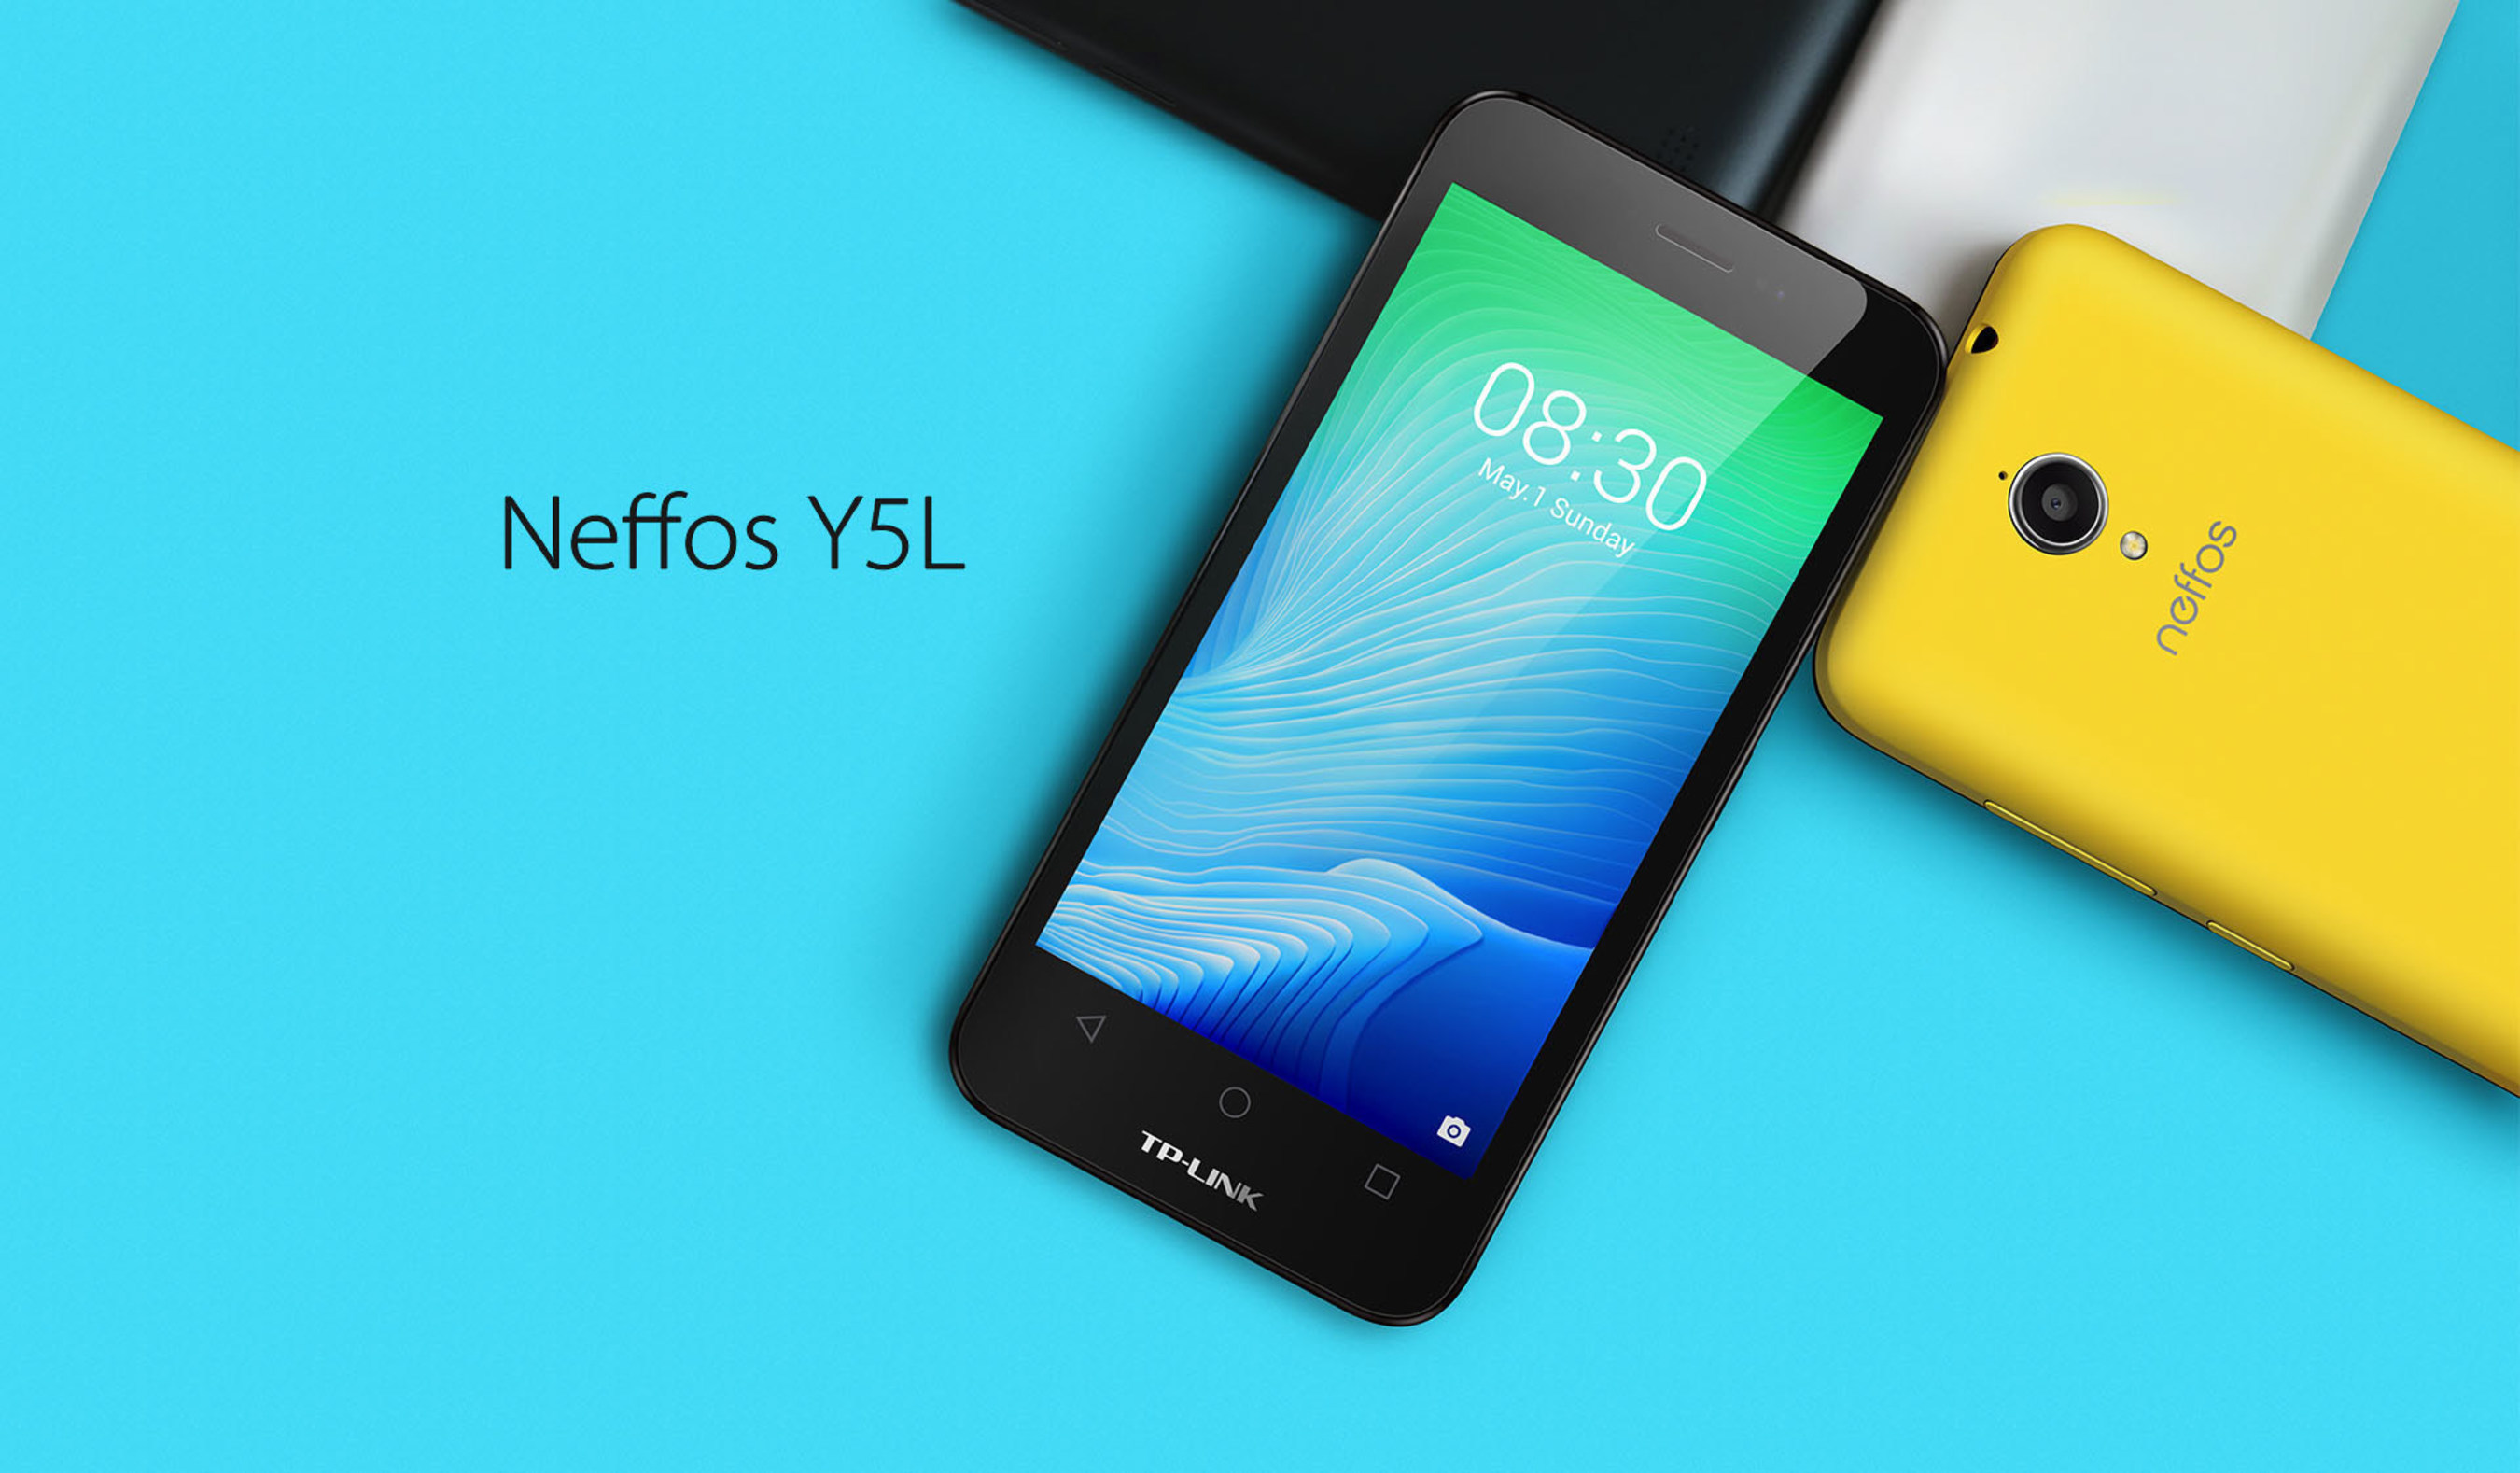 TP-LINK takes the wraps off of the new Neffos Y5L smartphone